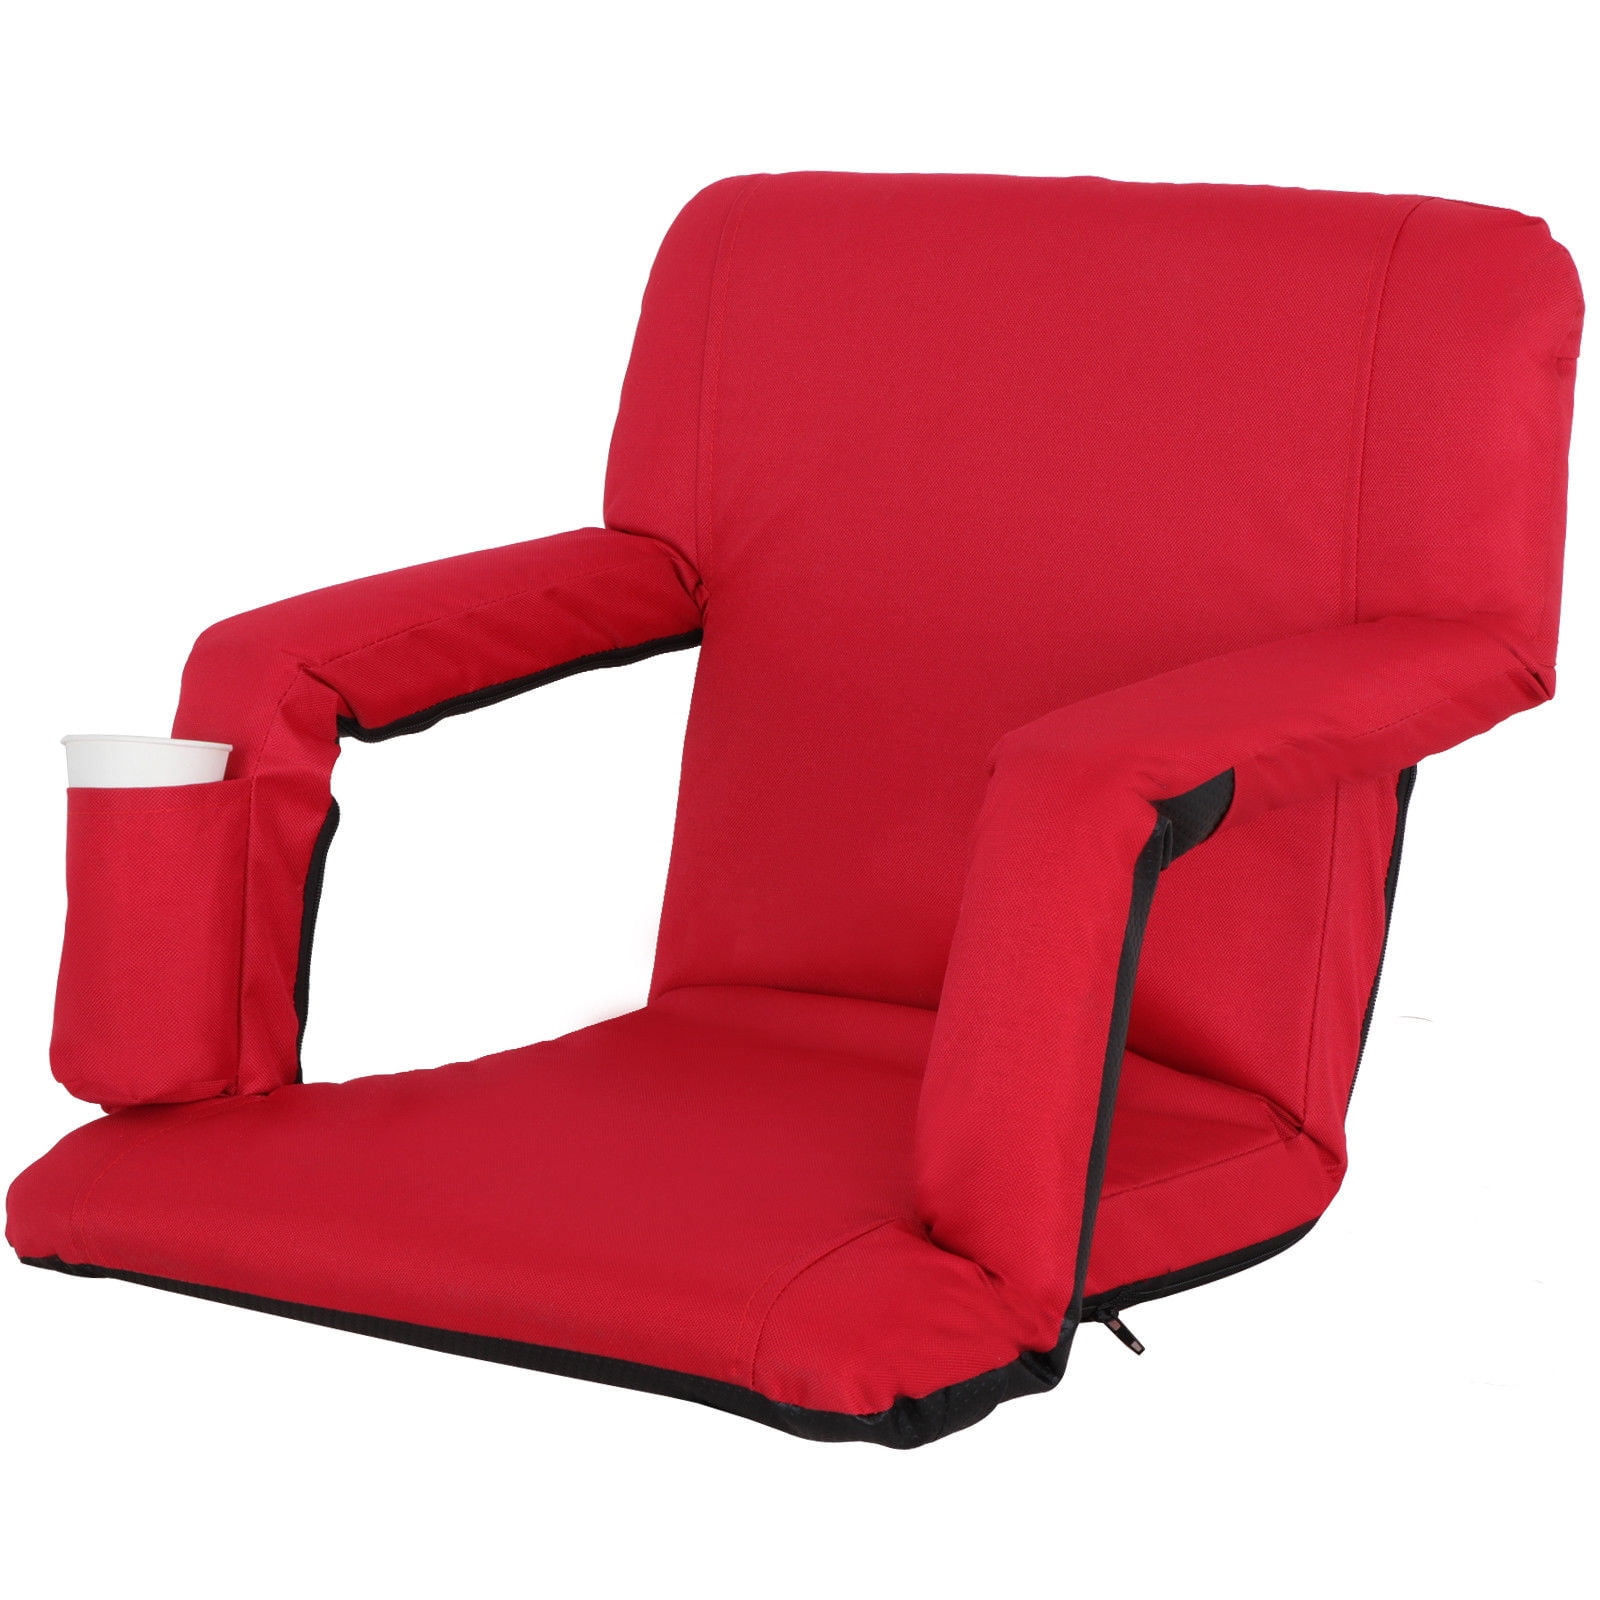 Armrest Support Wide Stadium Seat Chair For Bleachers Benches Portable Red 